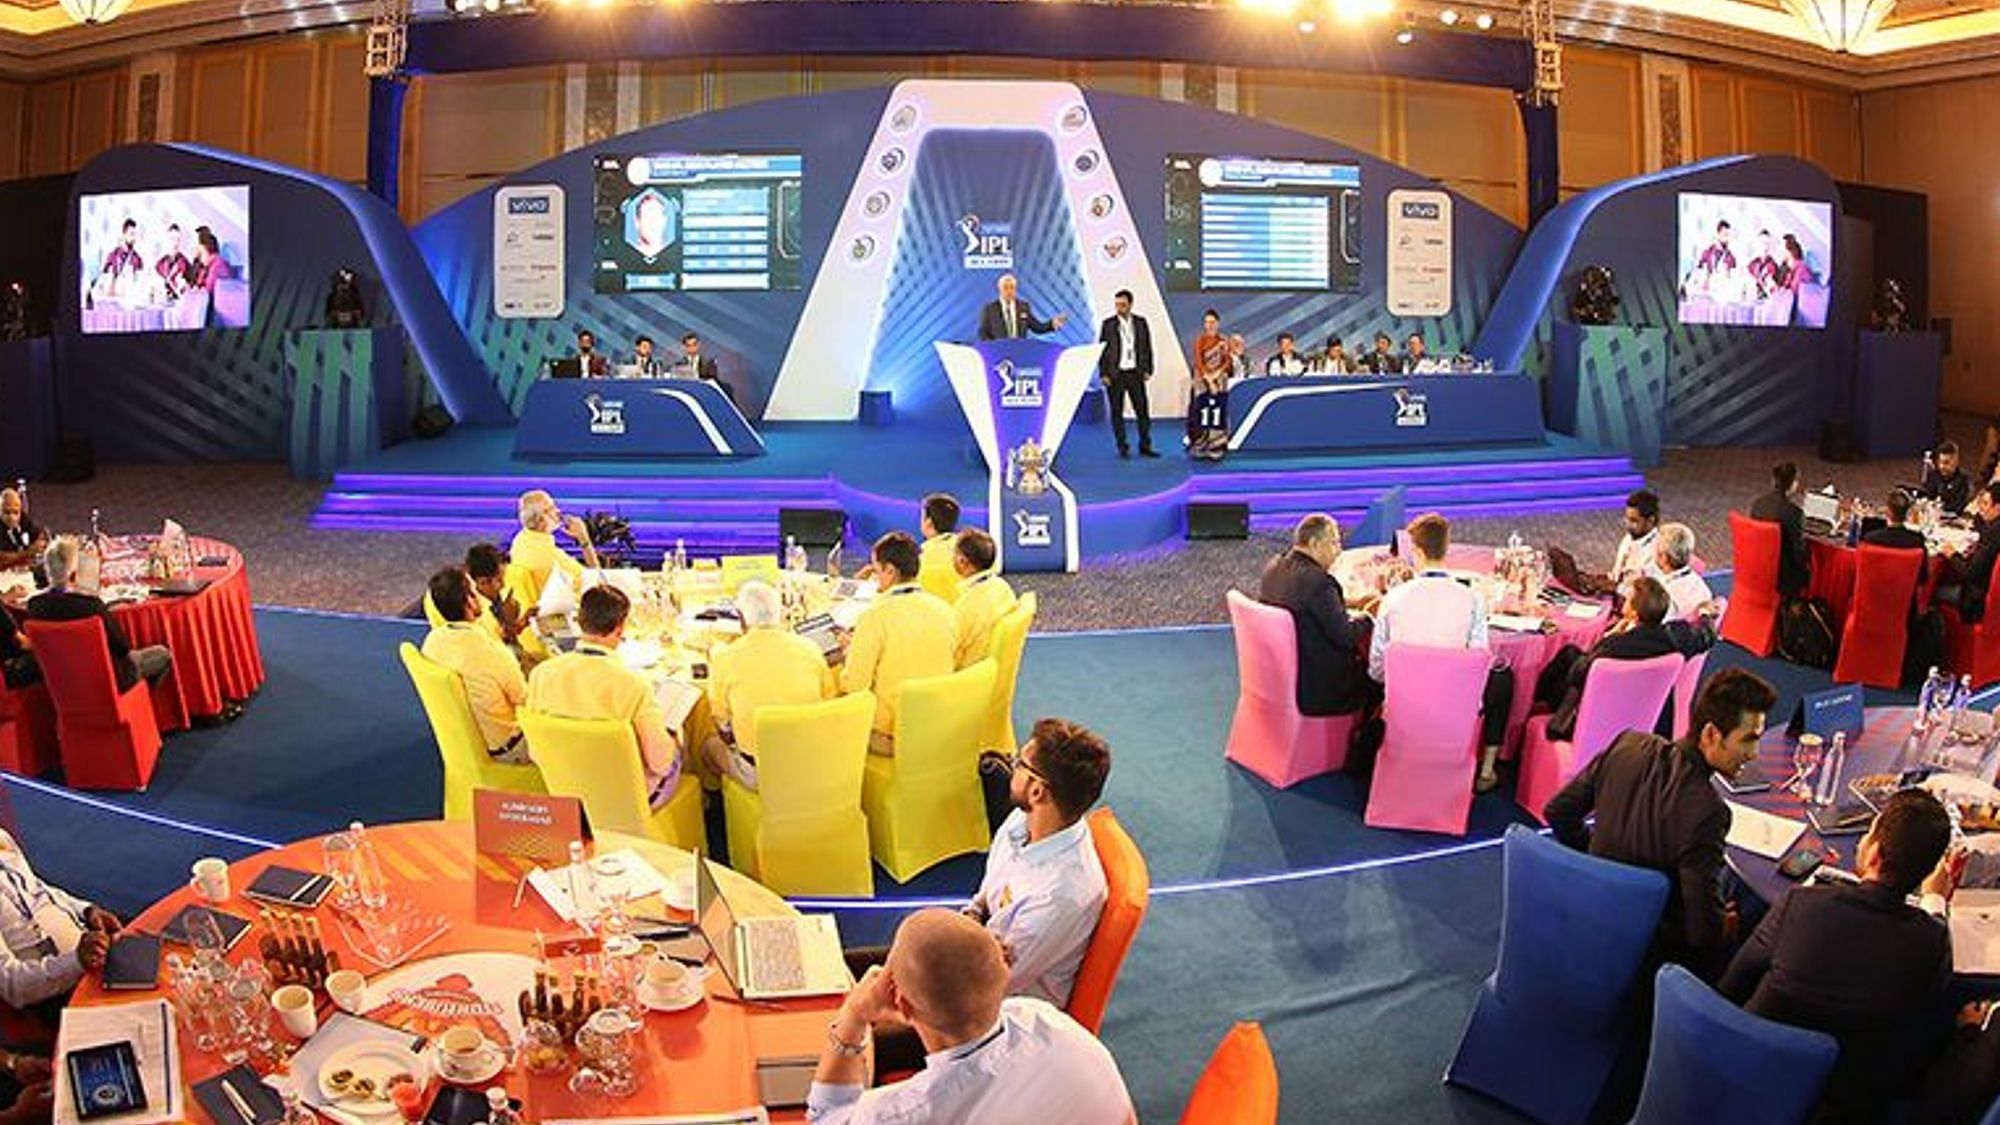 The 2021 IPL Player Auction will take place on February 18 in Chennai.